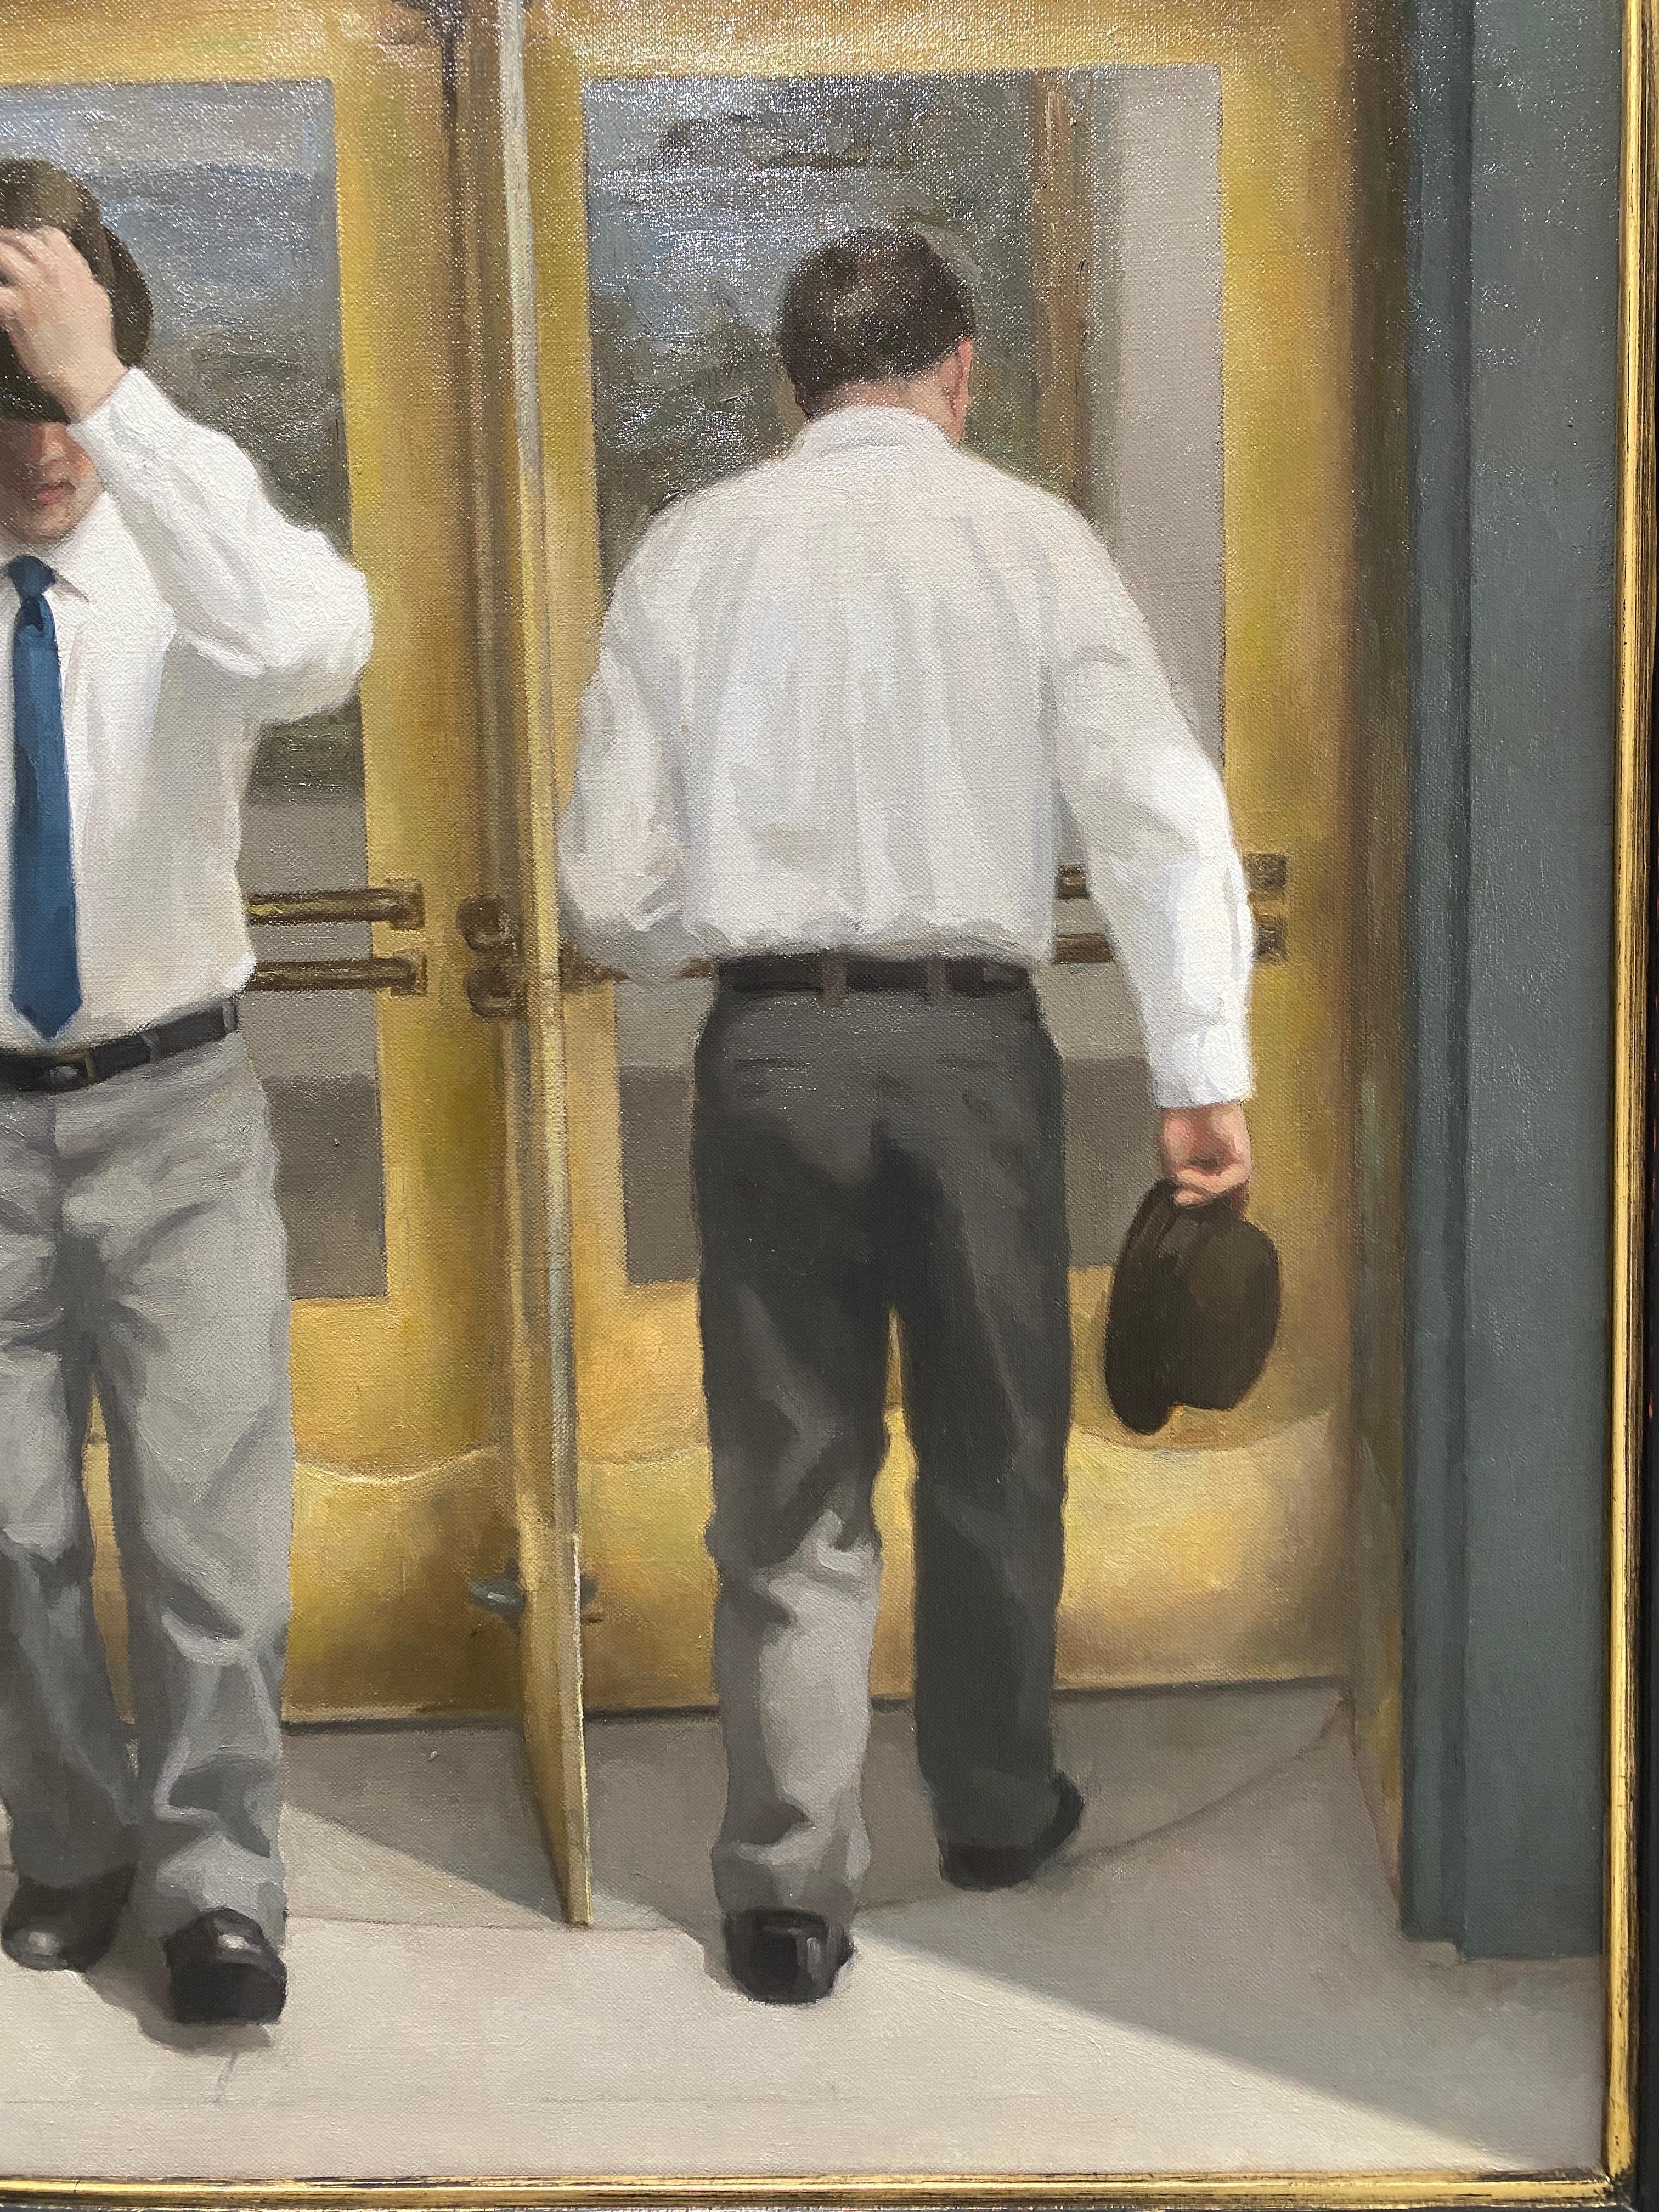 An oil painting of figures moving through a revolving door. The narrative isn't clear, if this is two different men, one exiting the building, one entering. Or perhaps its more like a time lapse, where the figure exiting is the same as the figure